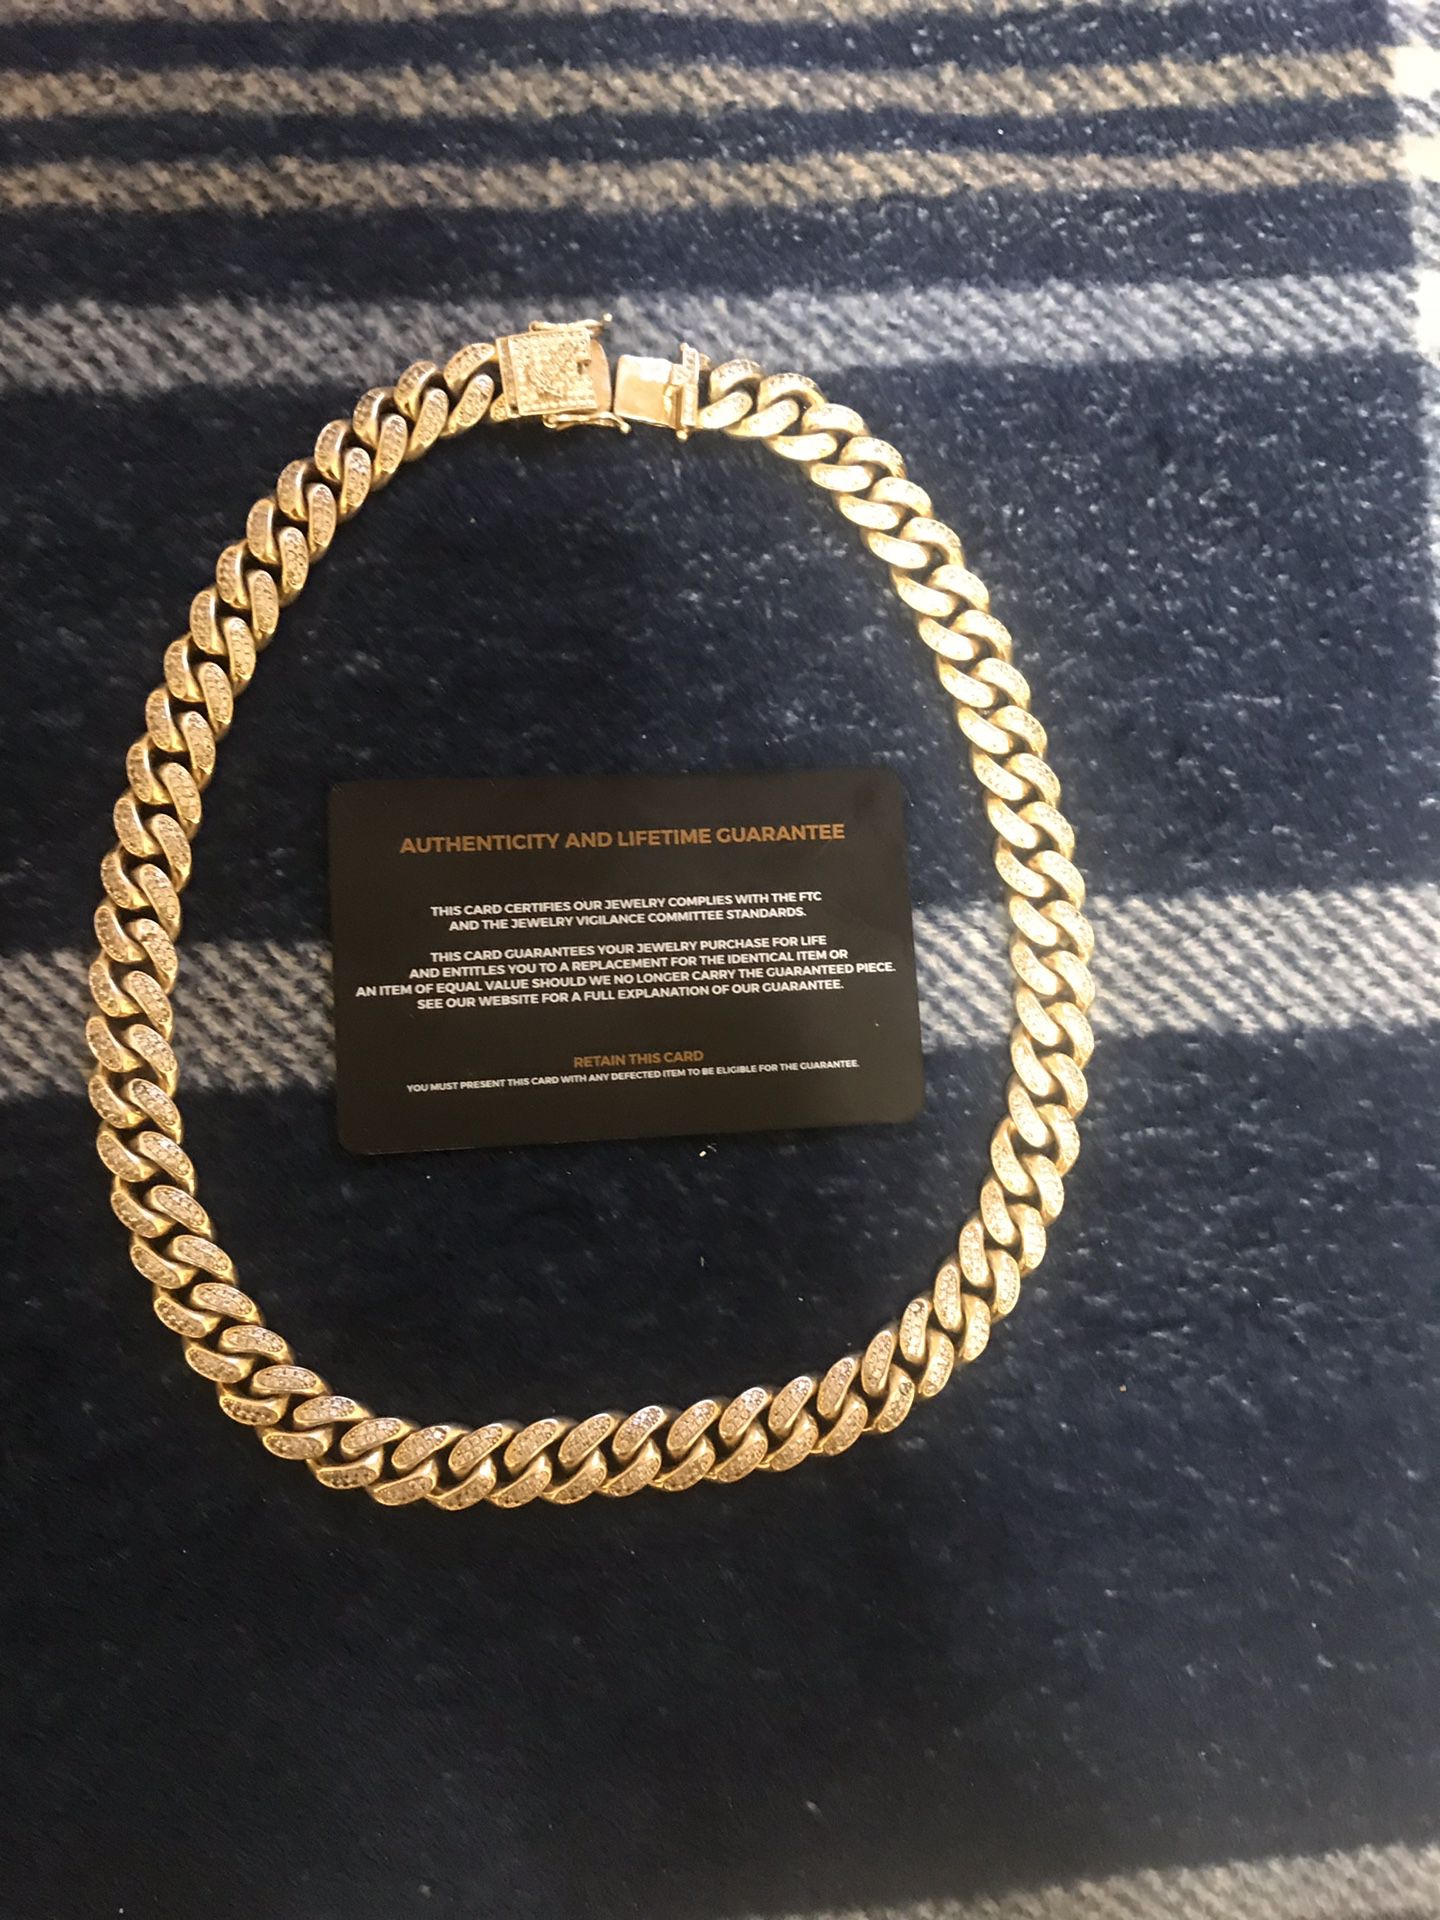 Gold Cuban link authentic paid 350 for it sale for 250